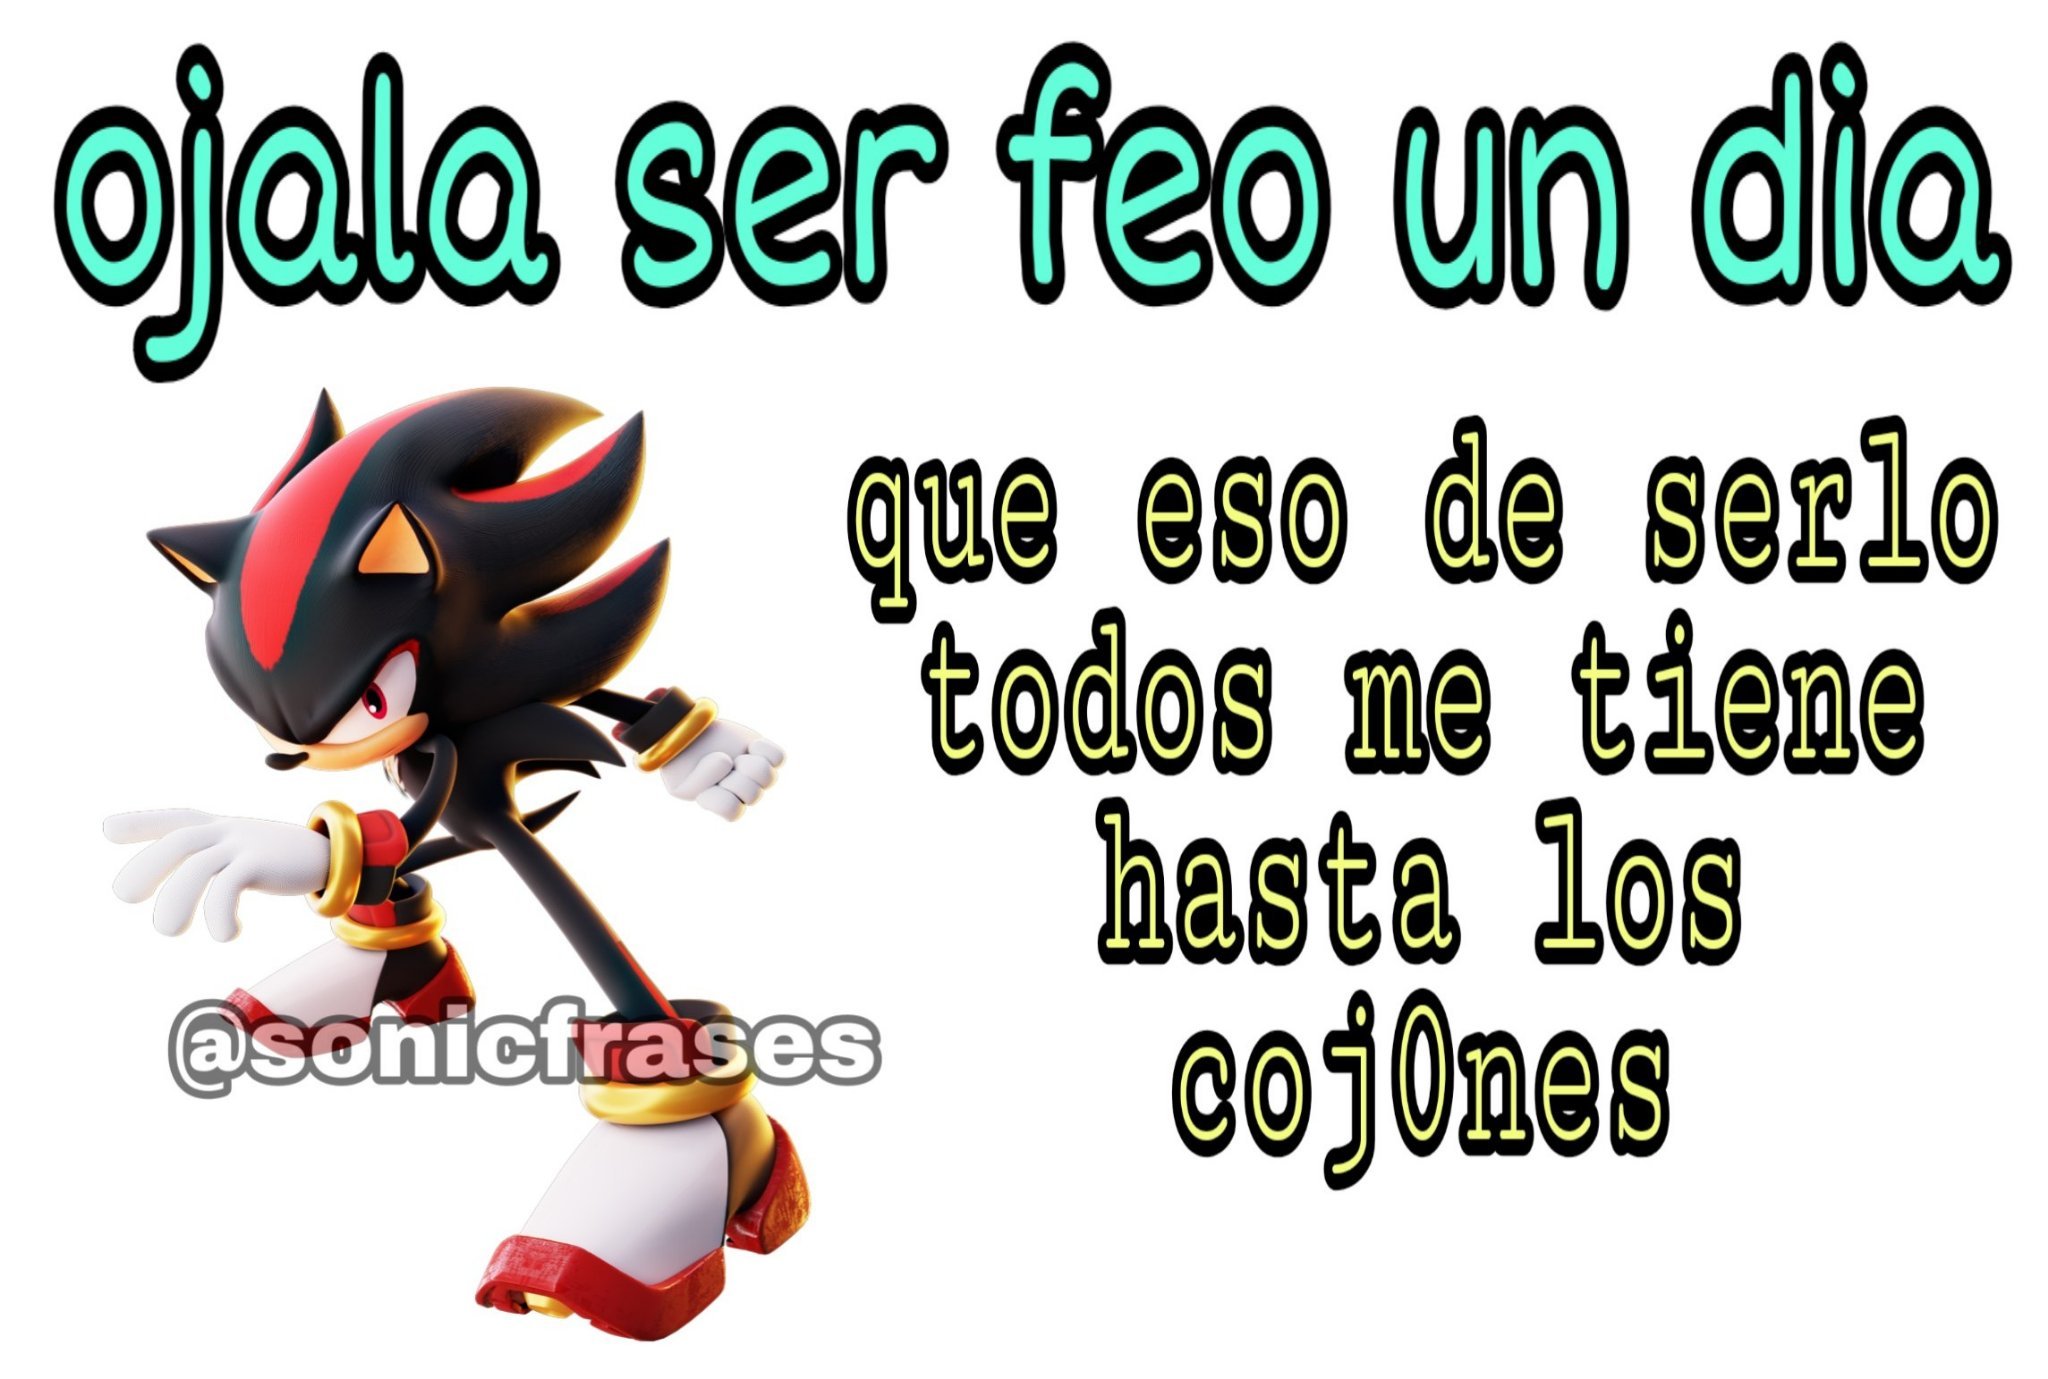 creo que le gusto - Meme by sonicfrases :) Memedroid